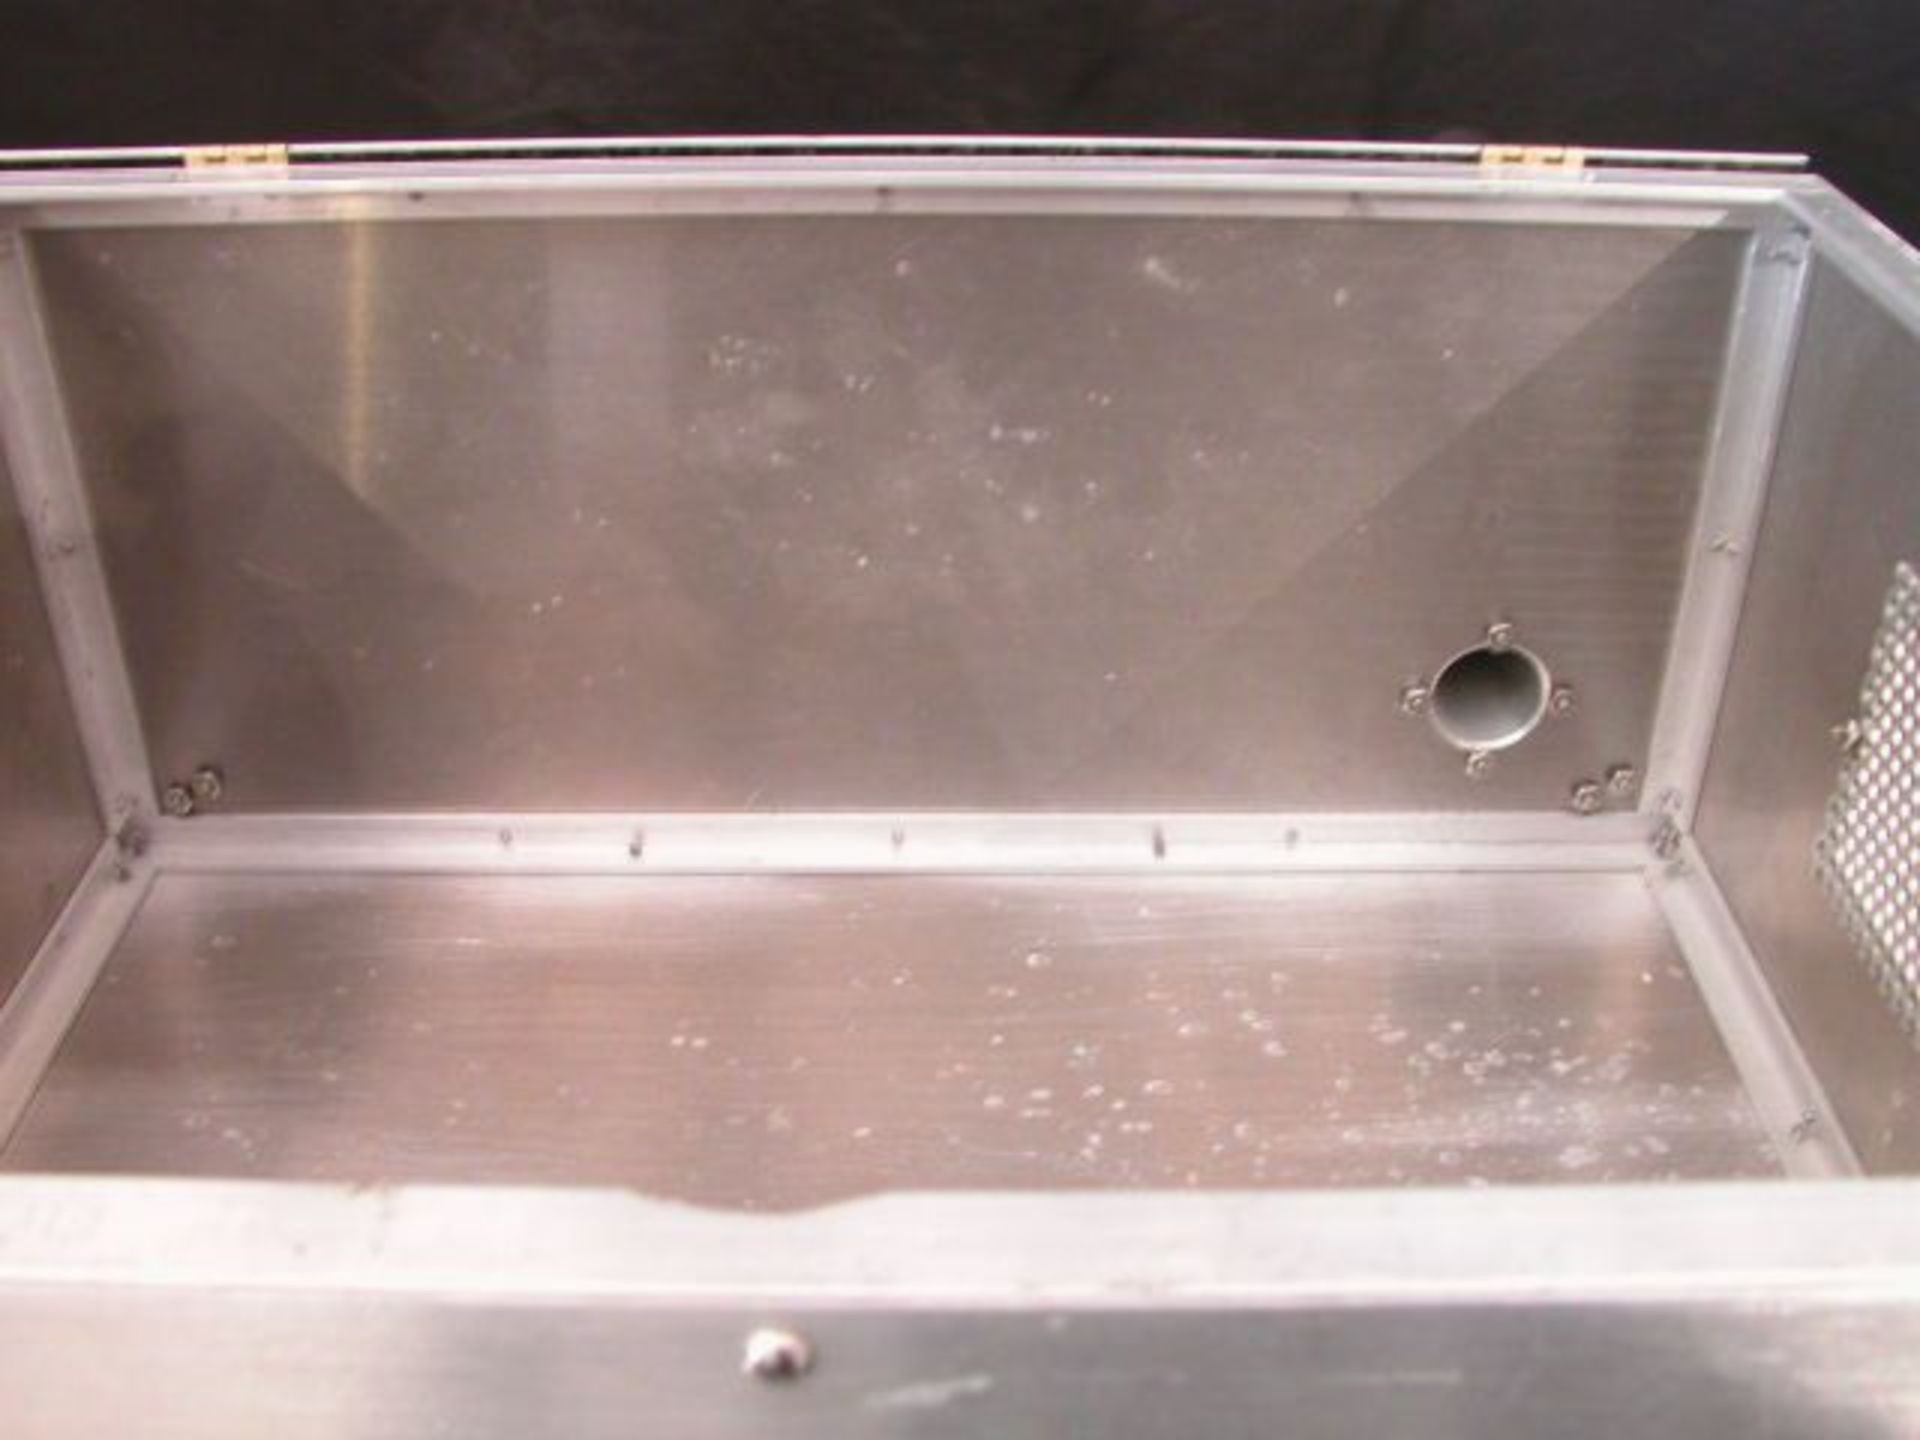 Aluminum Rodent Testing Cage Box Apparatus, Qty 1, 330958320420 - Image 2 of 4